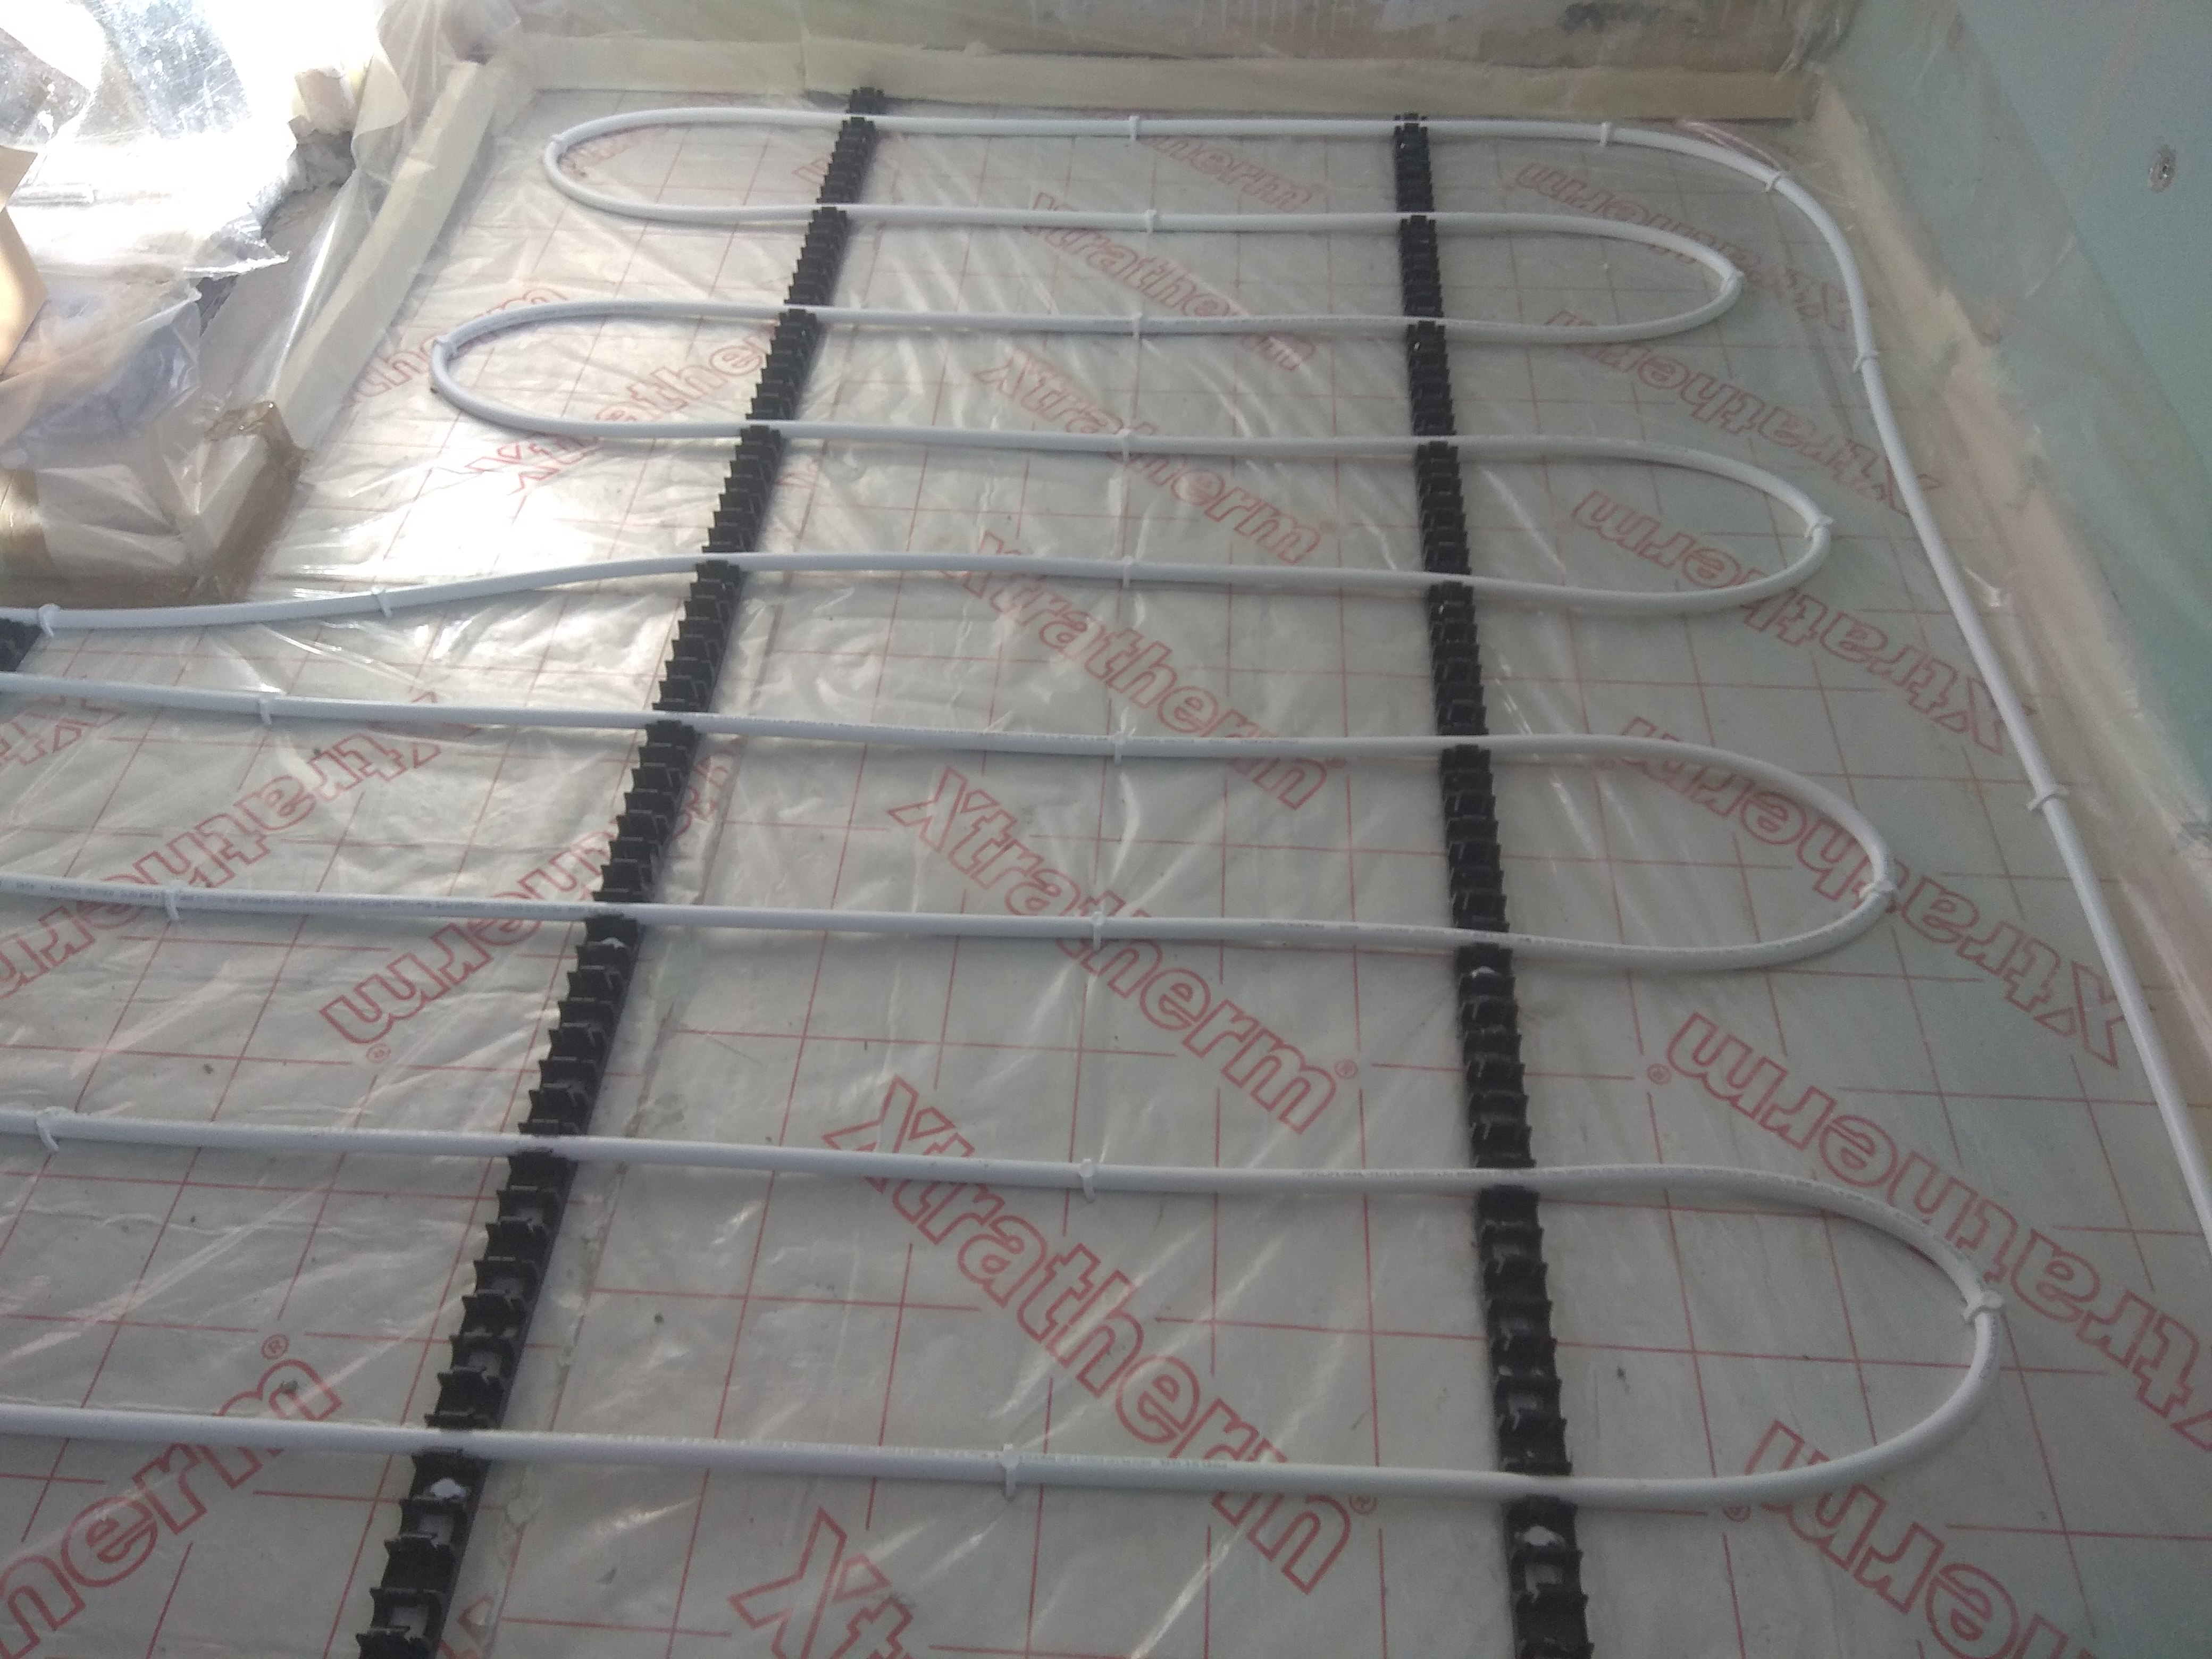 Underfloor heating is surprisingly simple - basically, put down insulation, put down a big loop of pipes and pour two inches of concrete on top